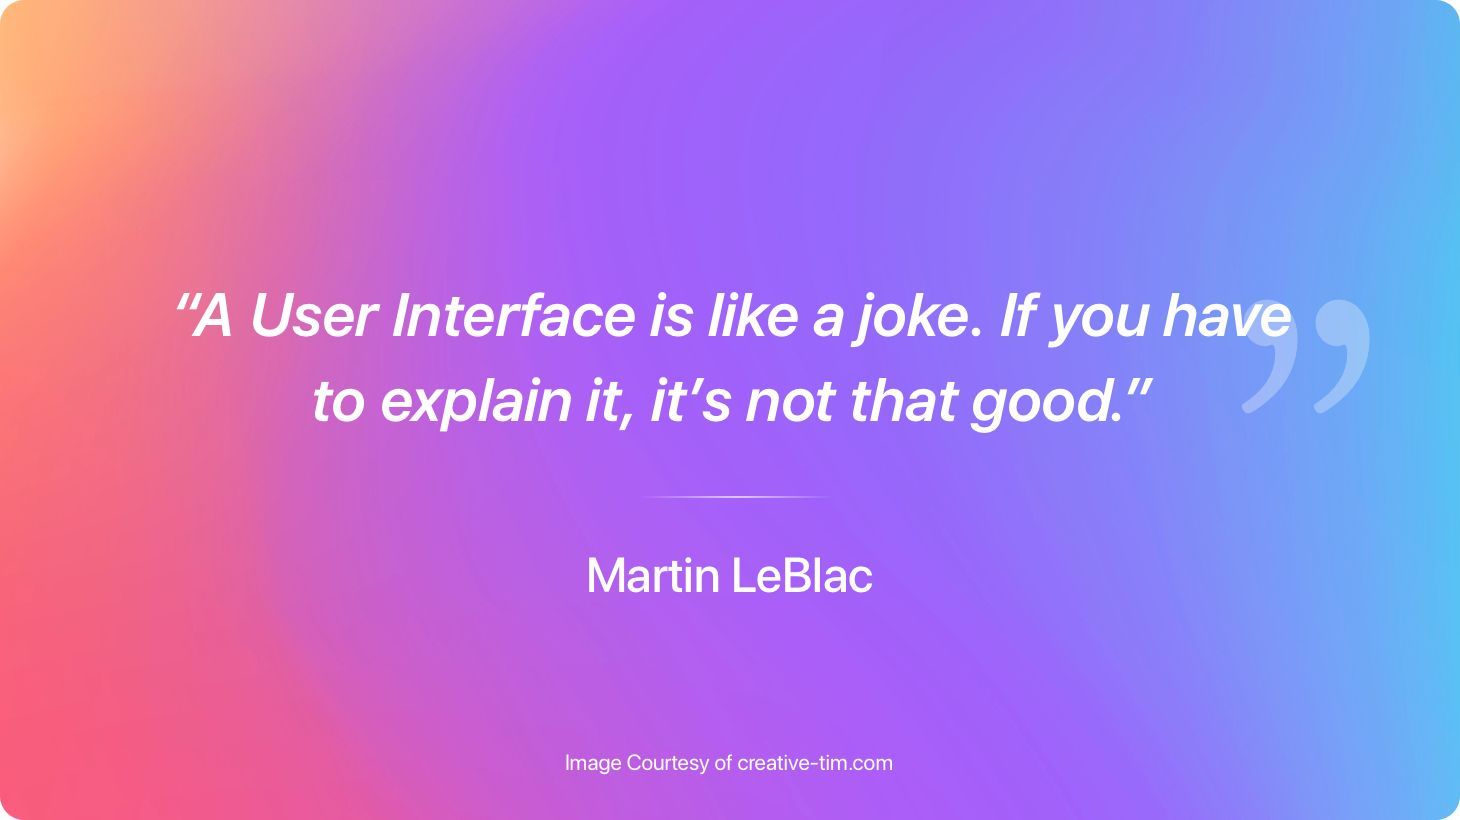 Image with the quote "A User interface is like a joke. If you have to explain it, it's not that good." — Martin LeBlac